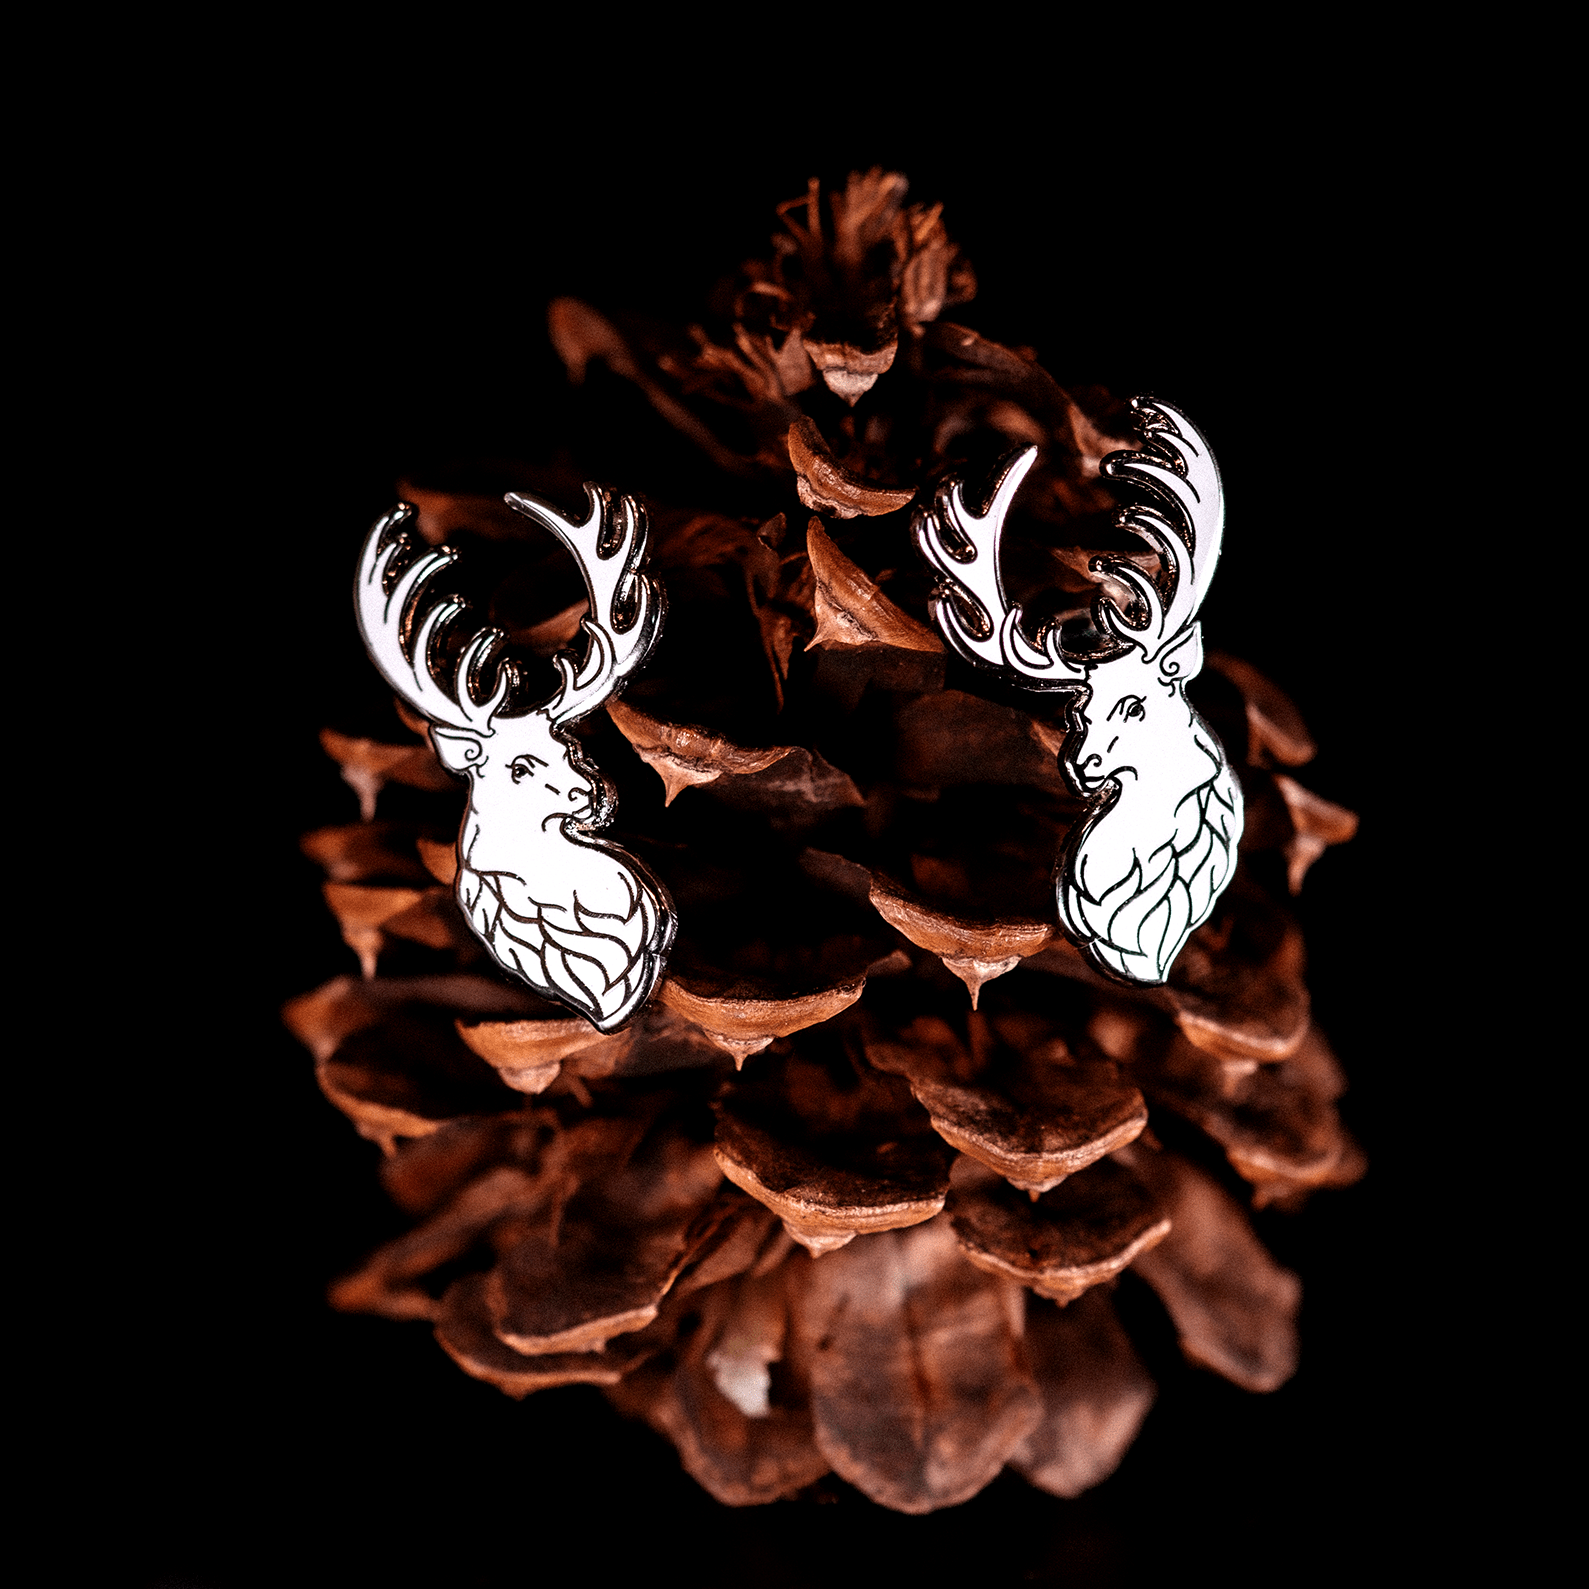 A pair of white winter stag pins by The Roving House, positioned on a pinecone.